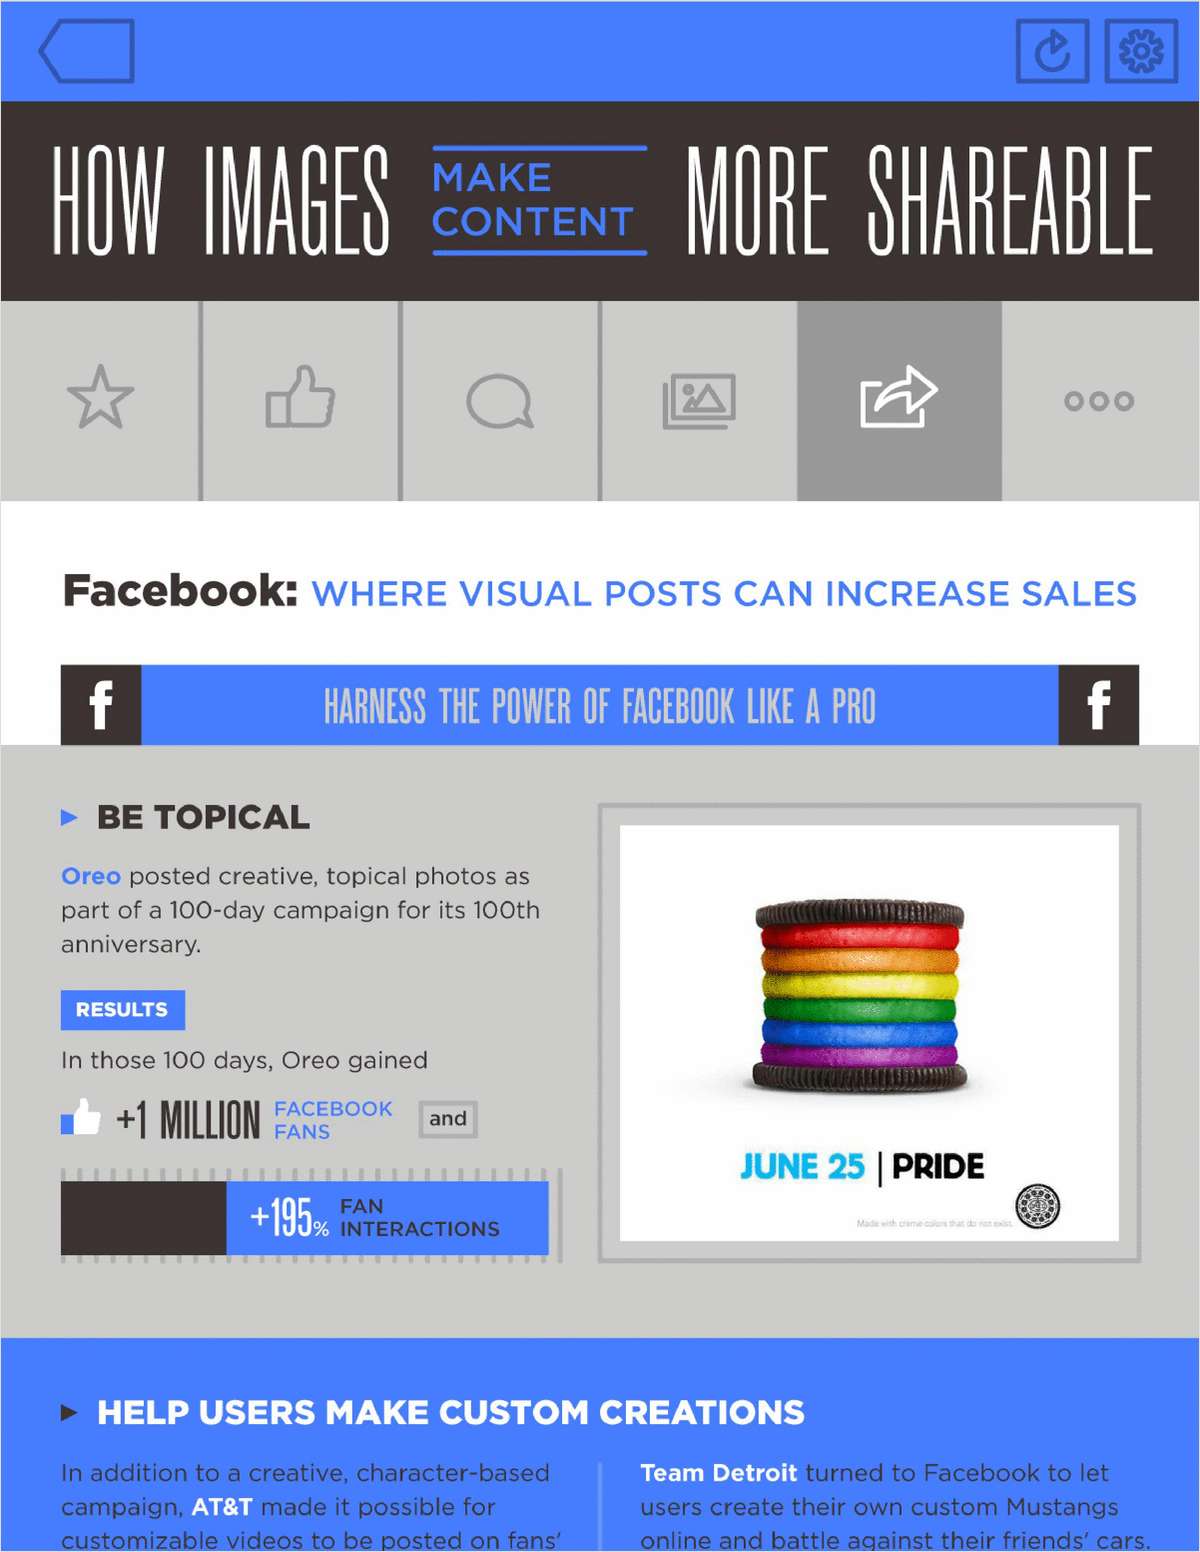 How Images Make Content More Shareable